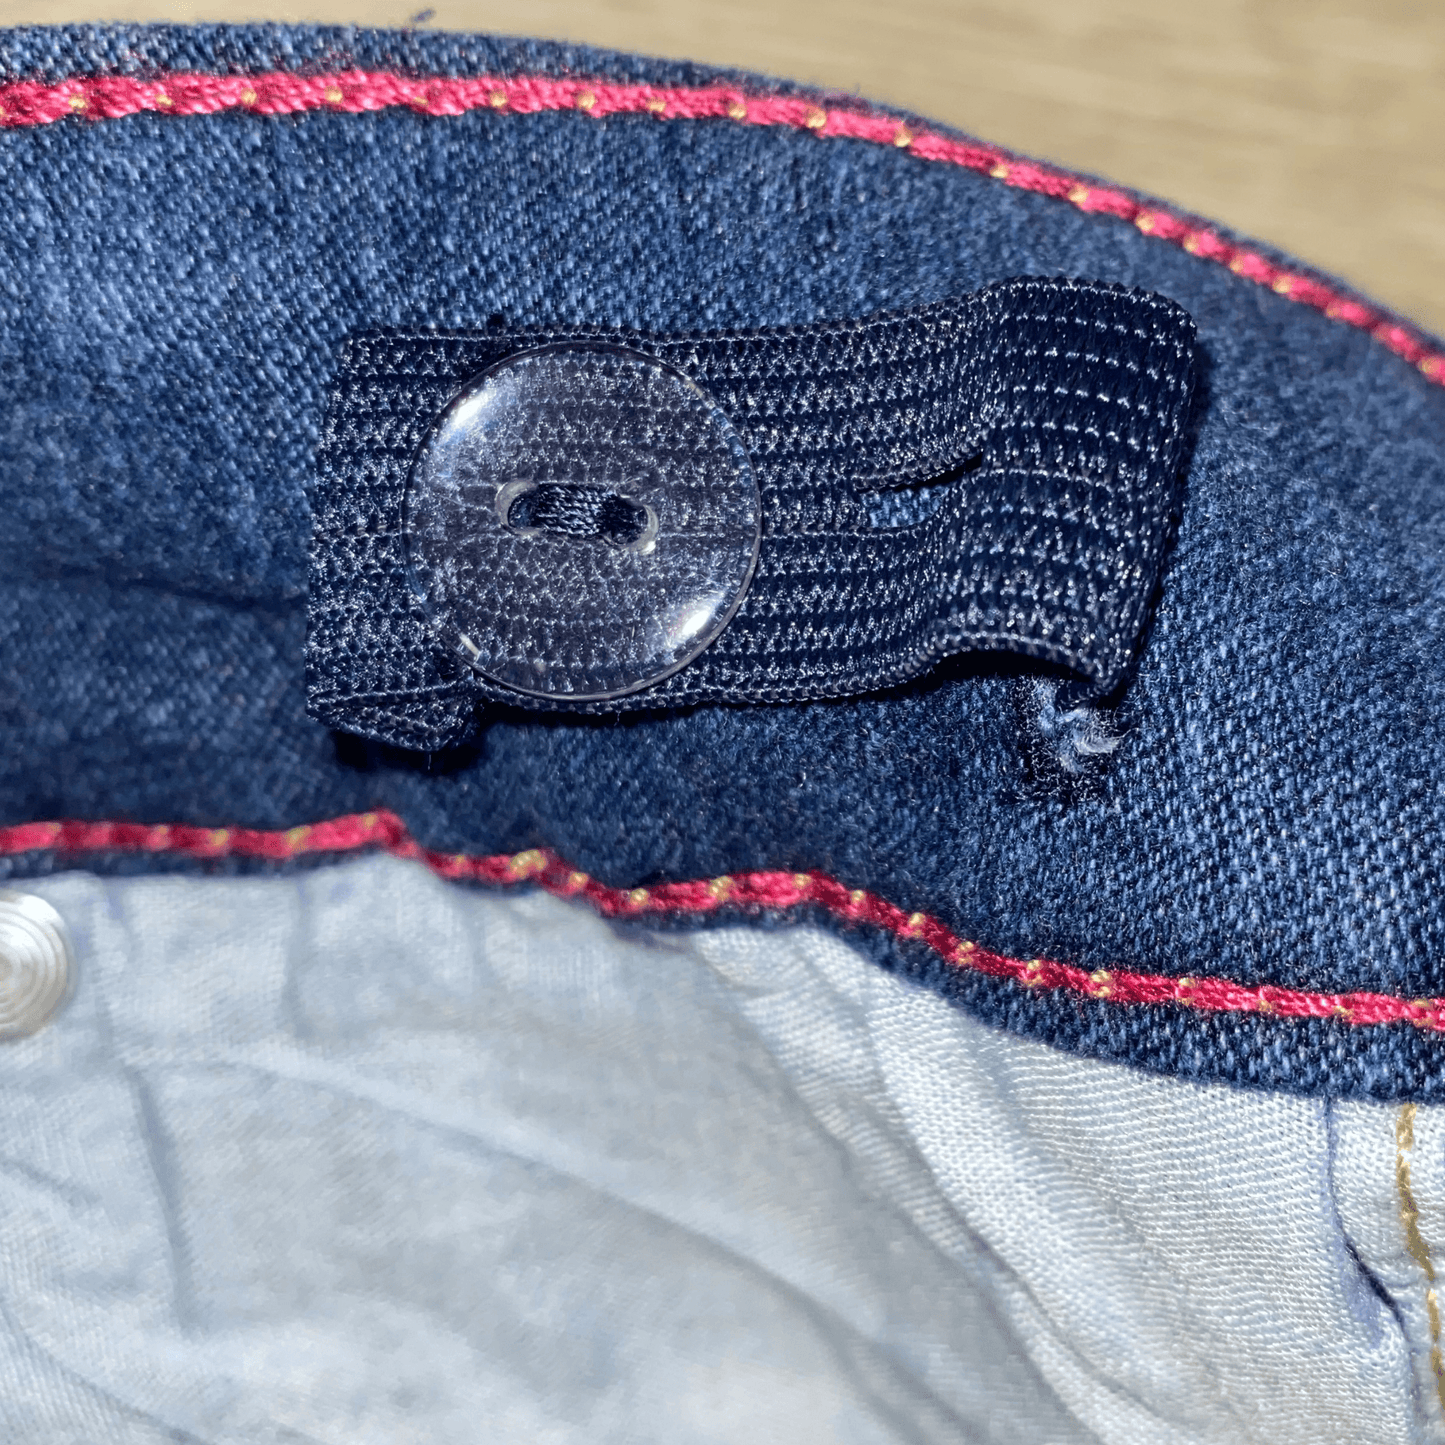 These jeans feature an adjustable waist.